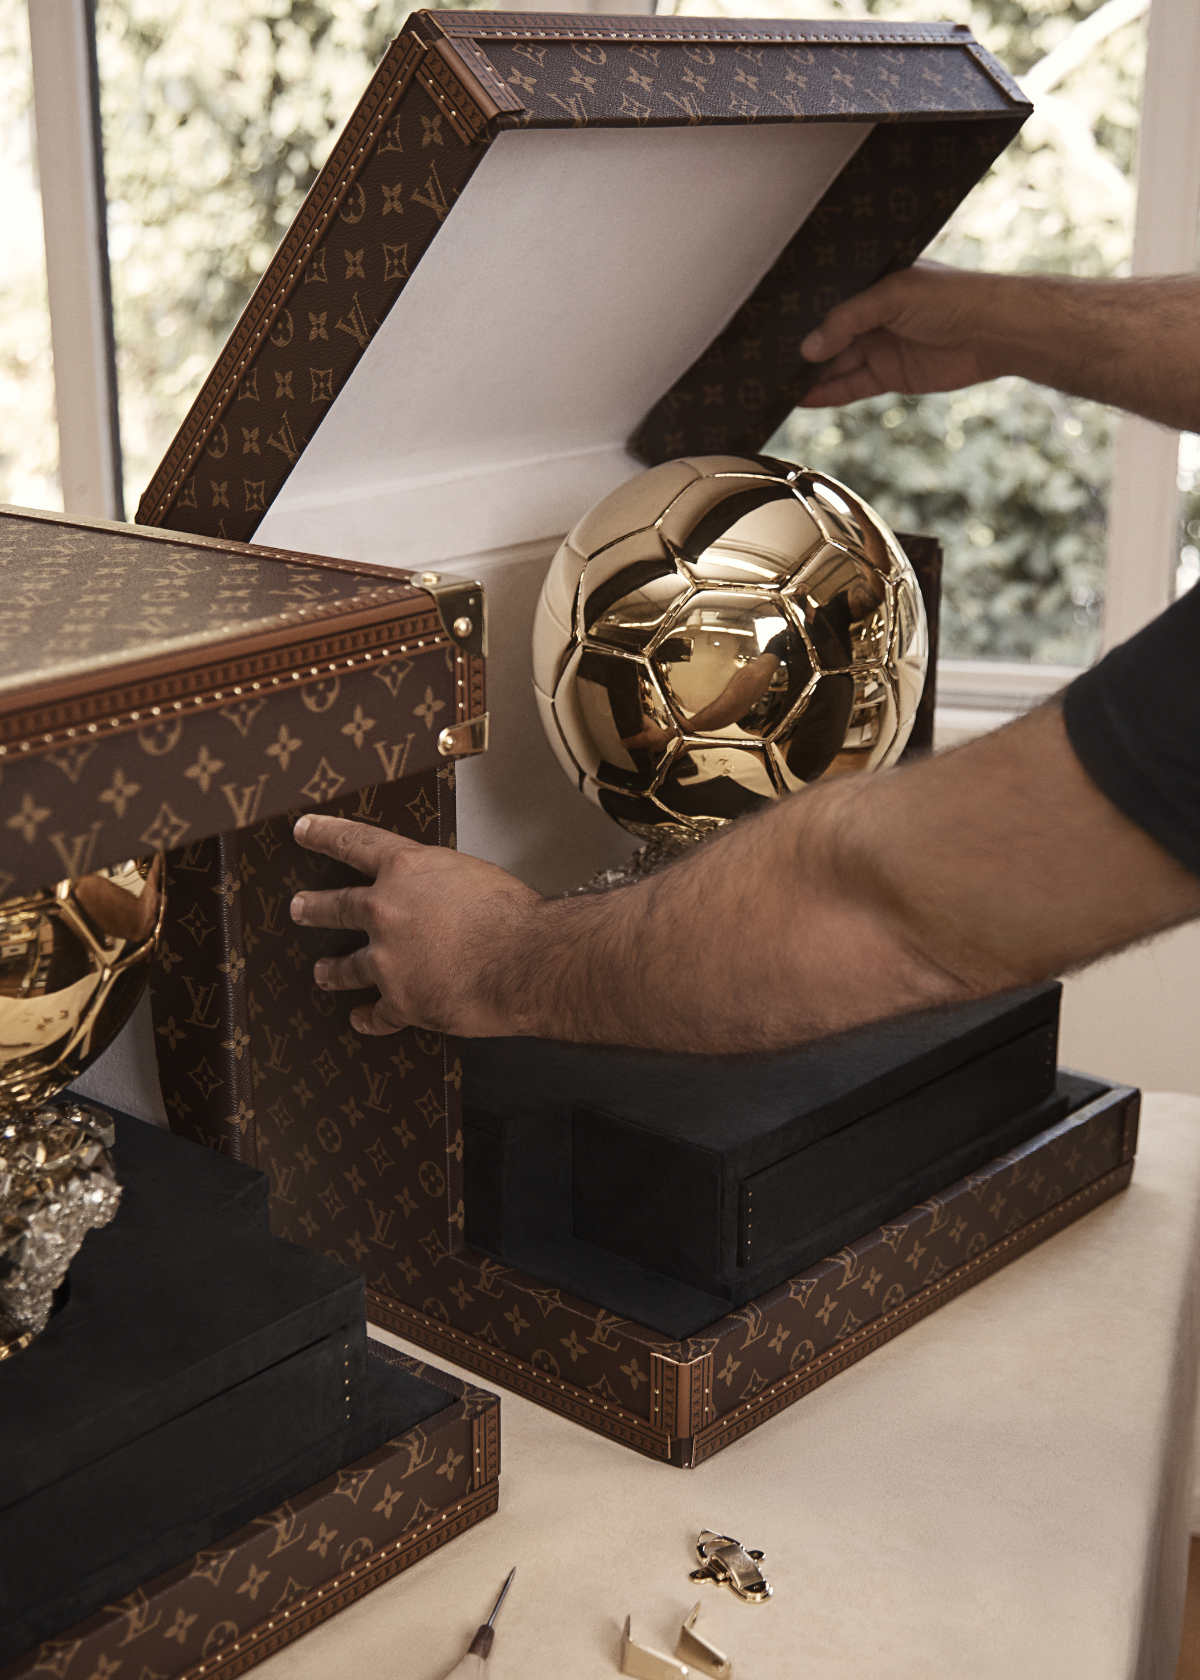 Louis Vuitton designs case for Rugby World Cup trophy